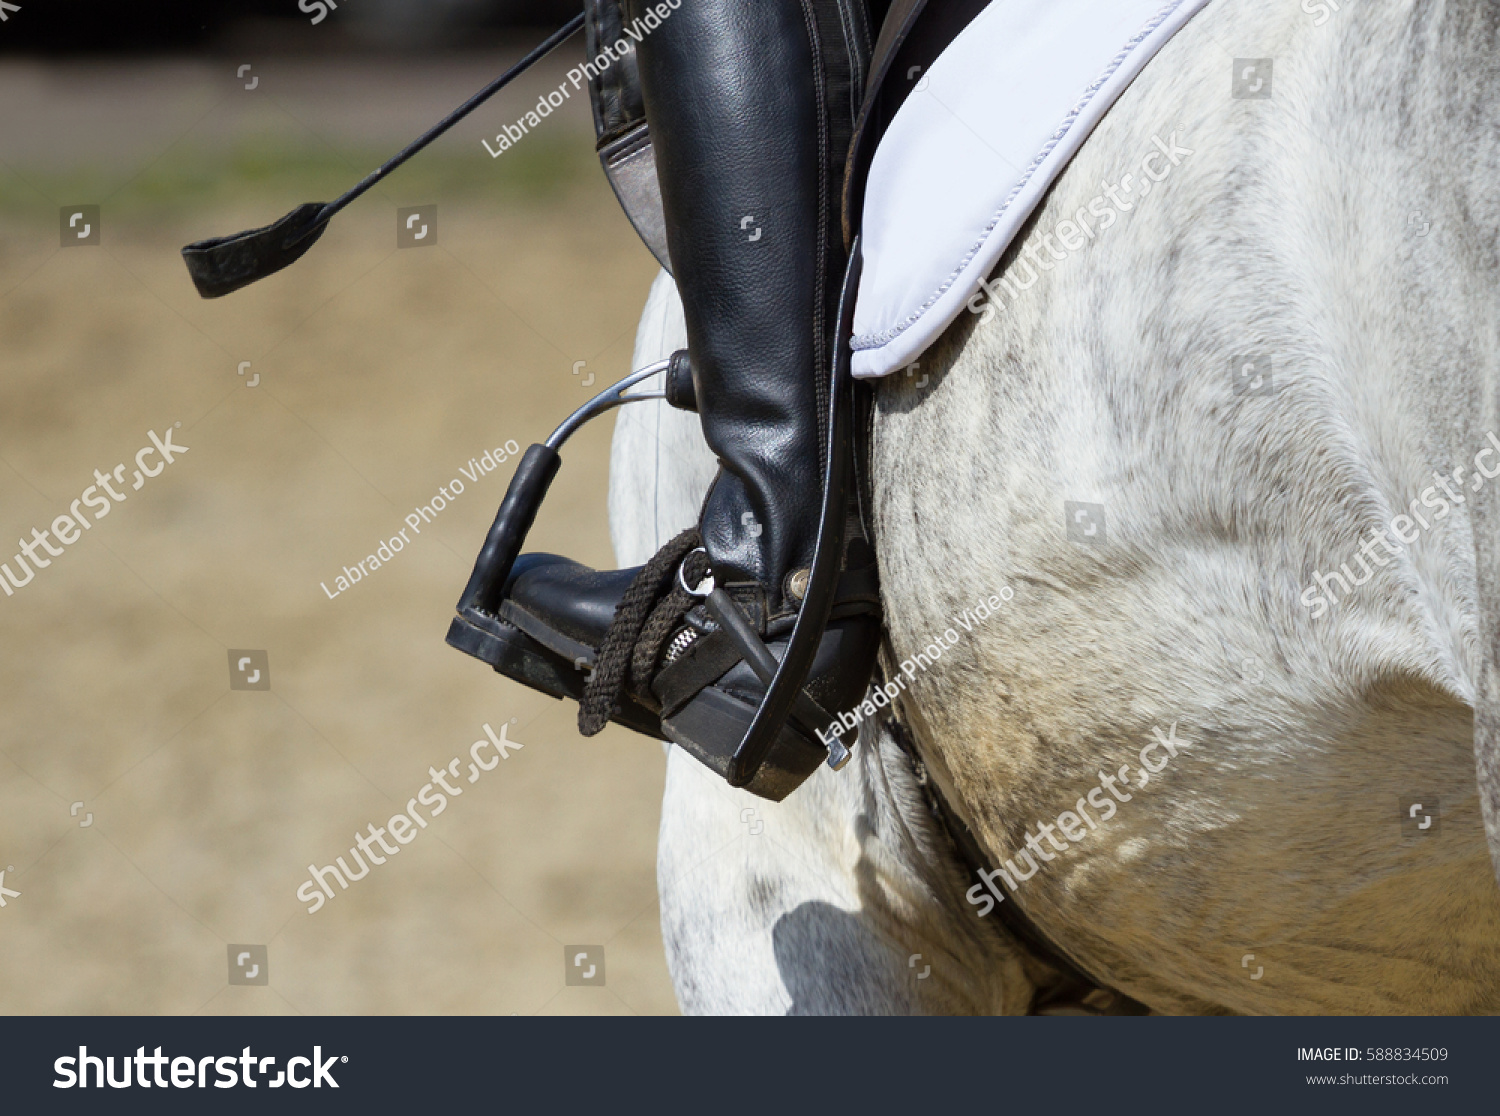 476 Whip and spur Images, Stock Photos & Vectors | Shutterstock